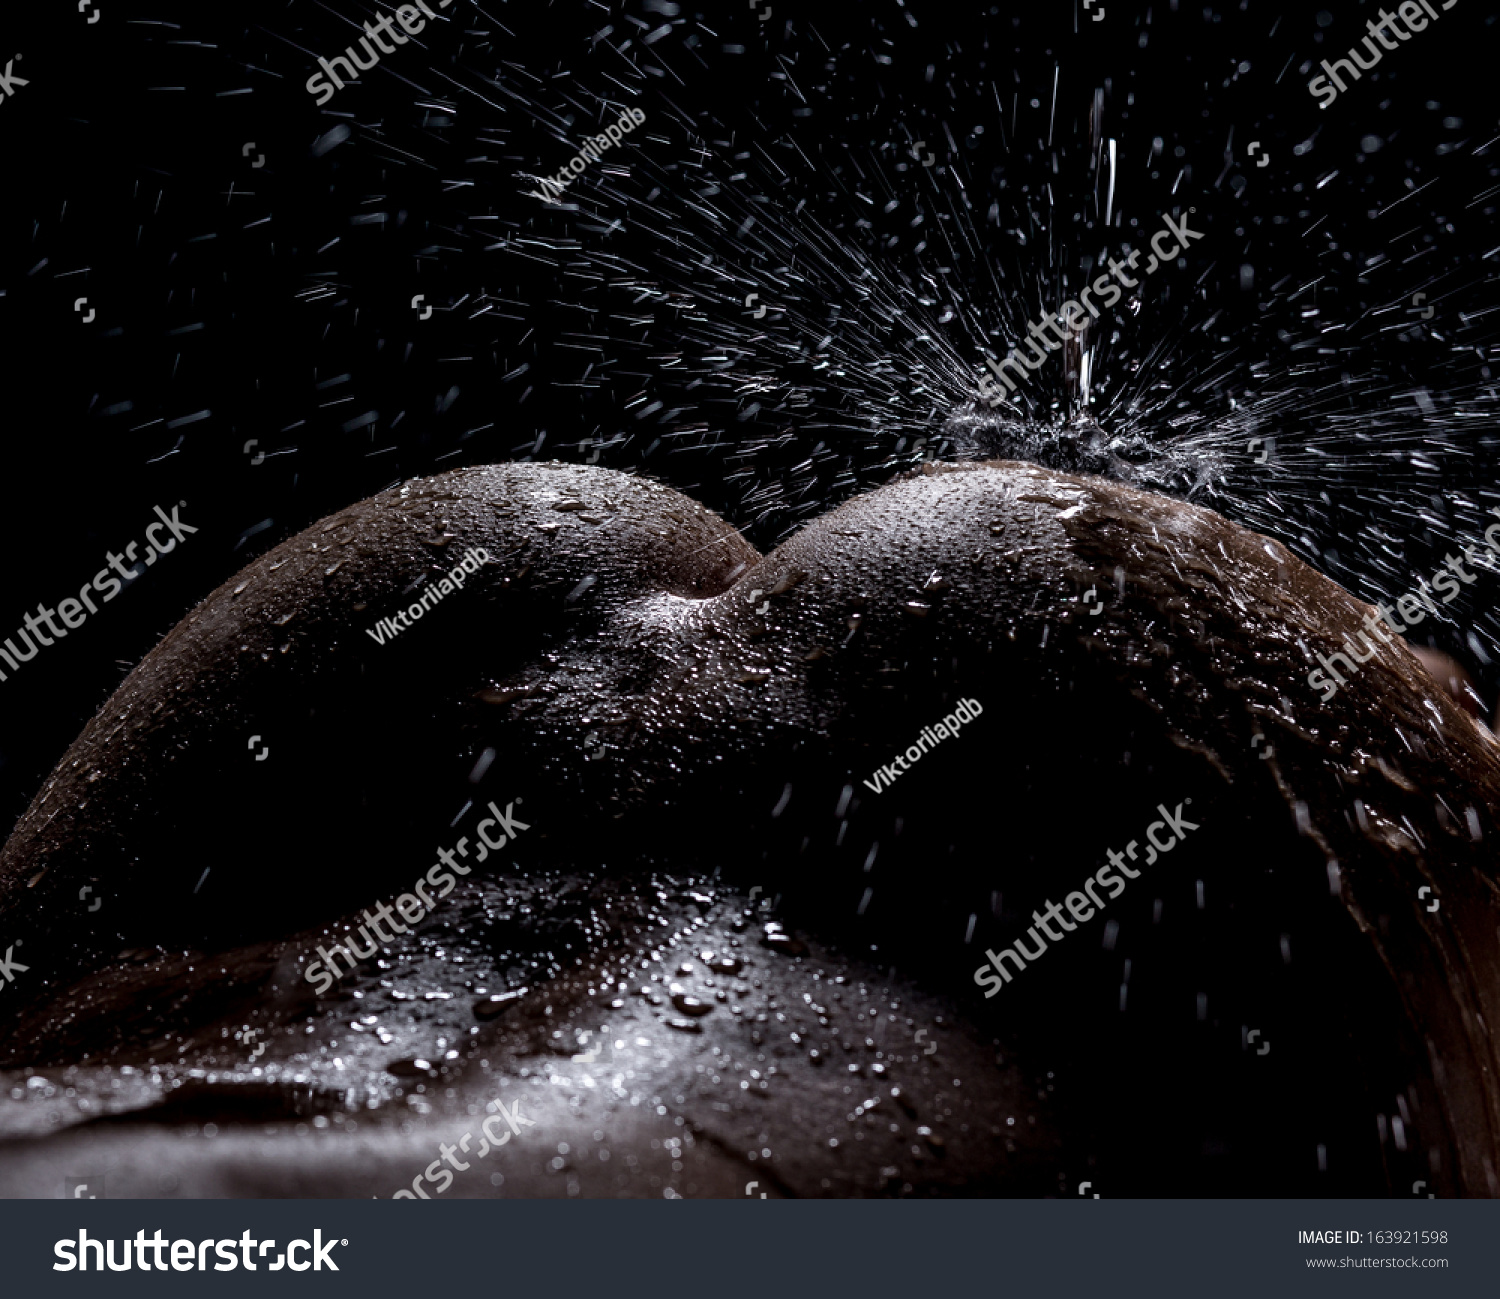 stock-photo-sexy-woman-butts-under-shower-black-background-163921598.jpg